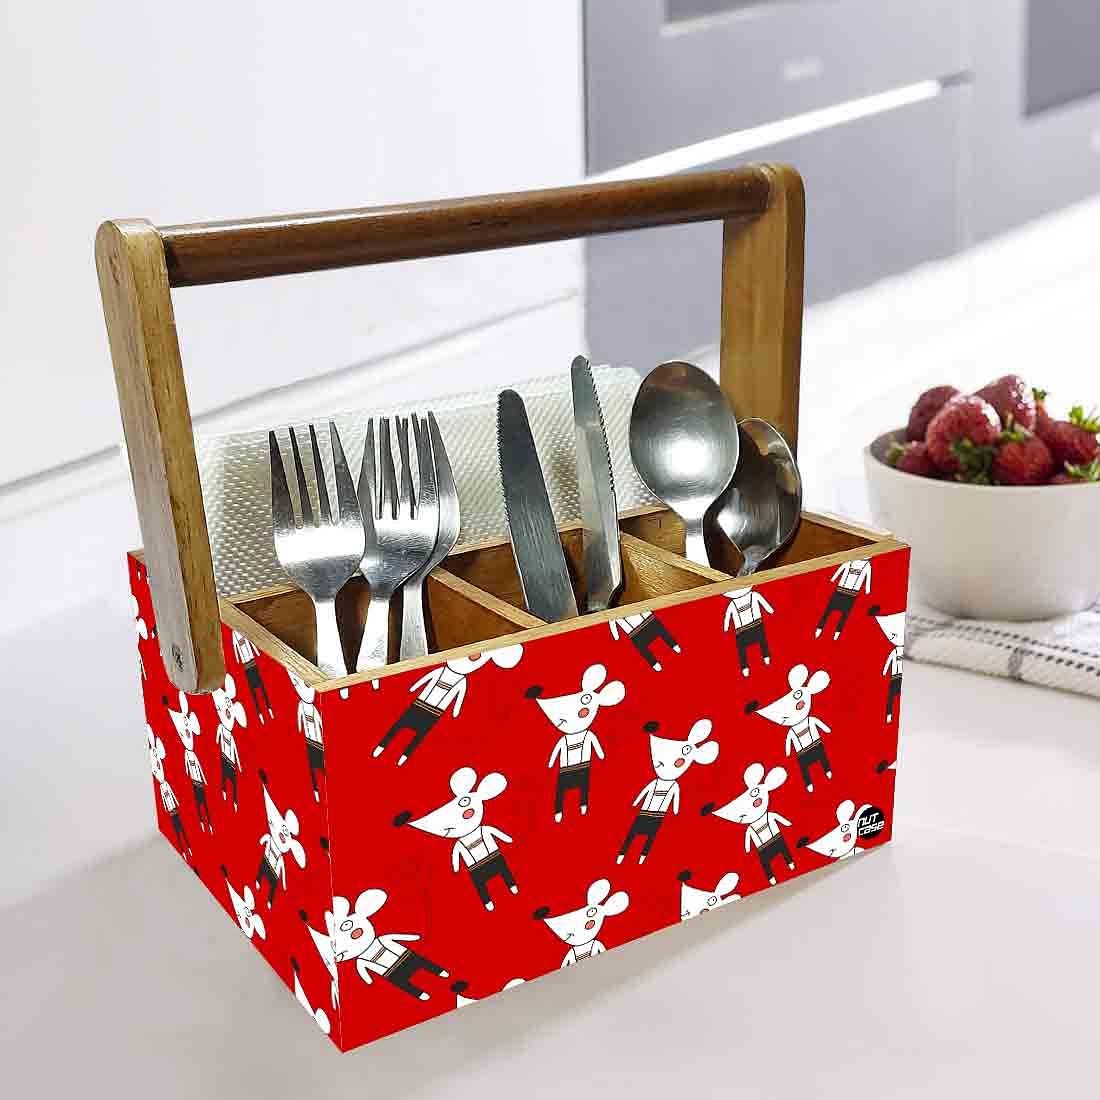 Cafe Cutlery Holder With Handle for Spoons Knives Tissue Organizer - Cool Micky Nutcase